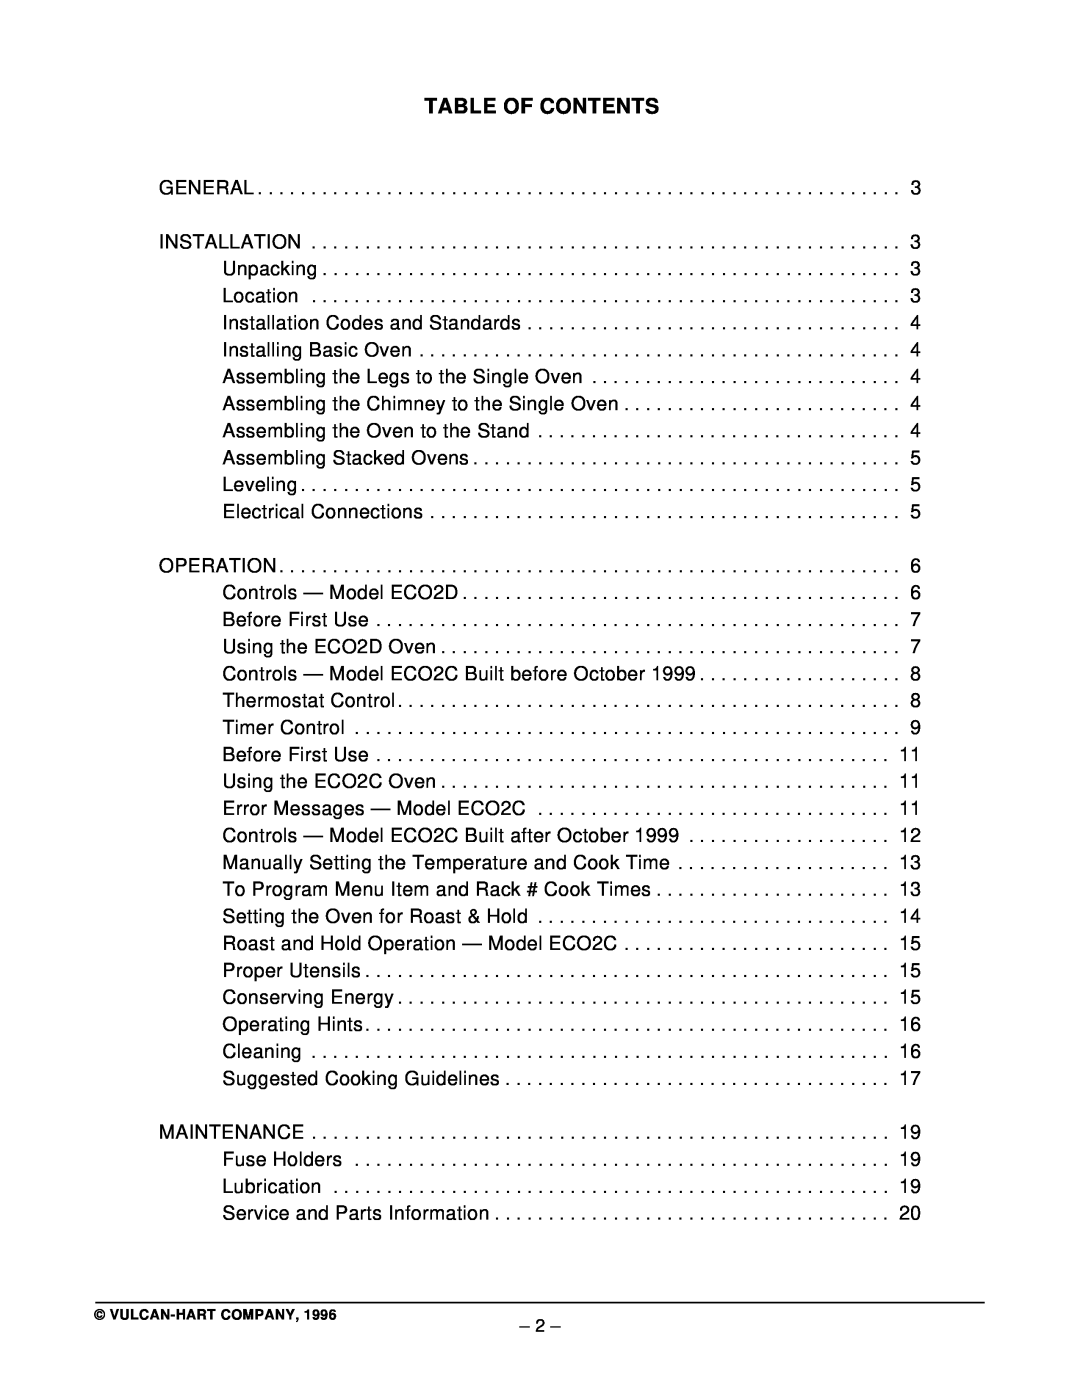 Vulcan-Hart ECO2D ML-114570, ECO2C ML-114572 operation manual Table Of Contents 